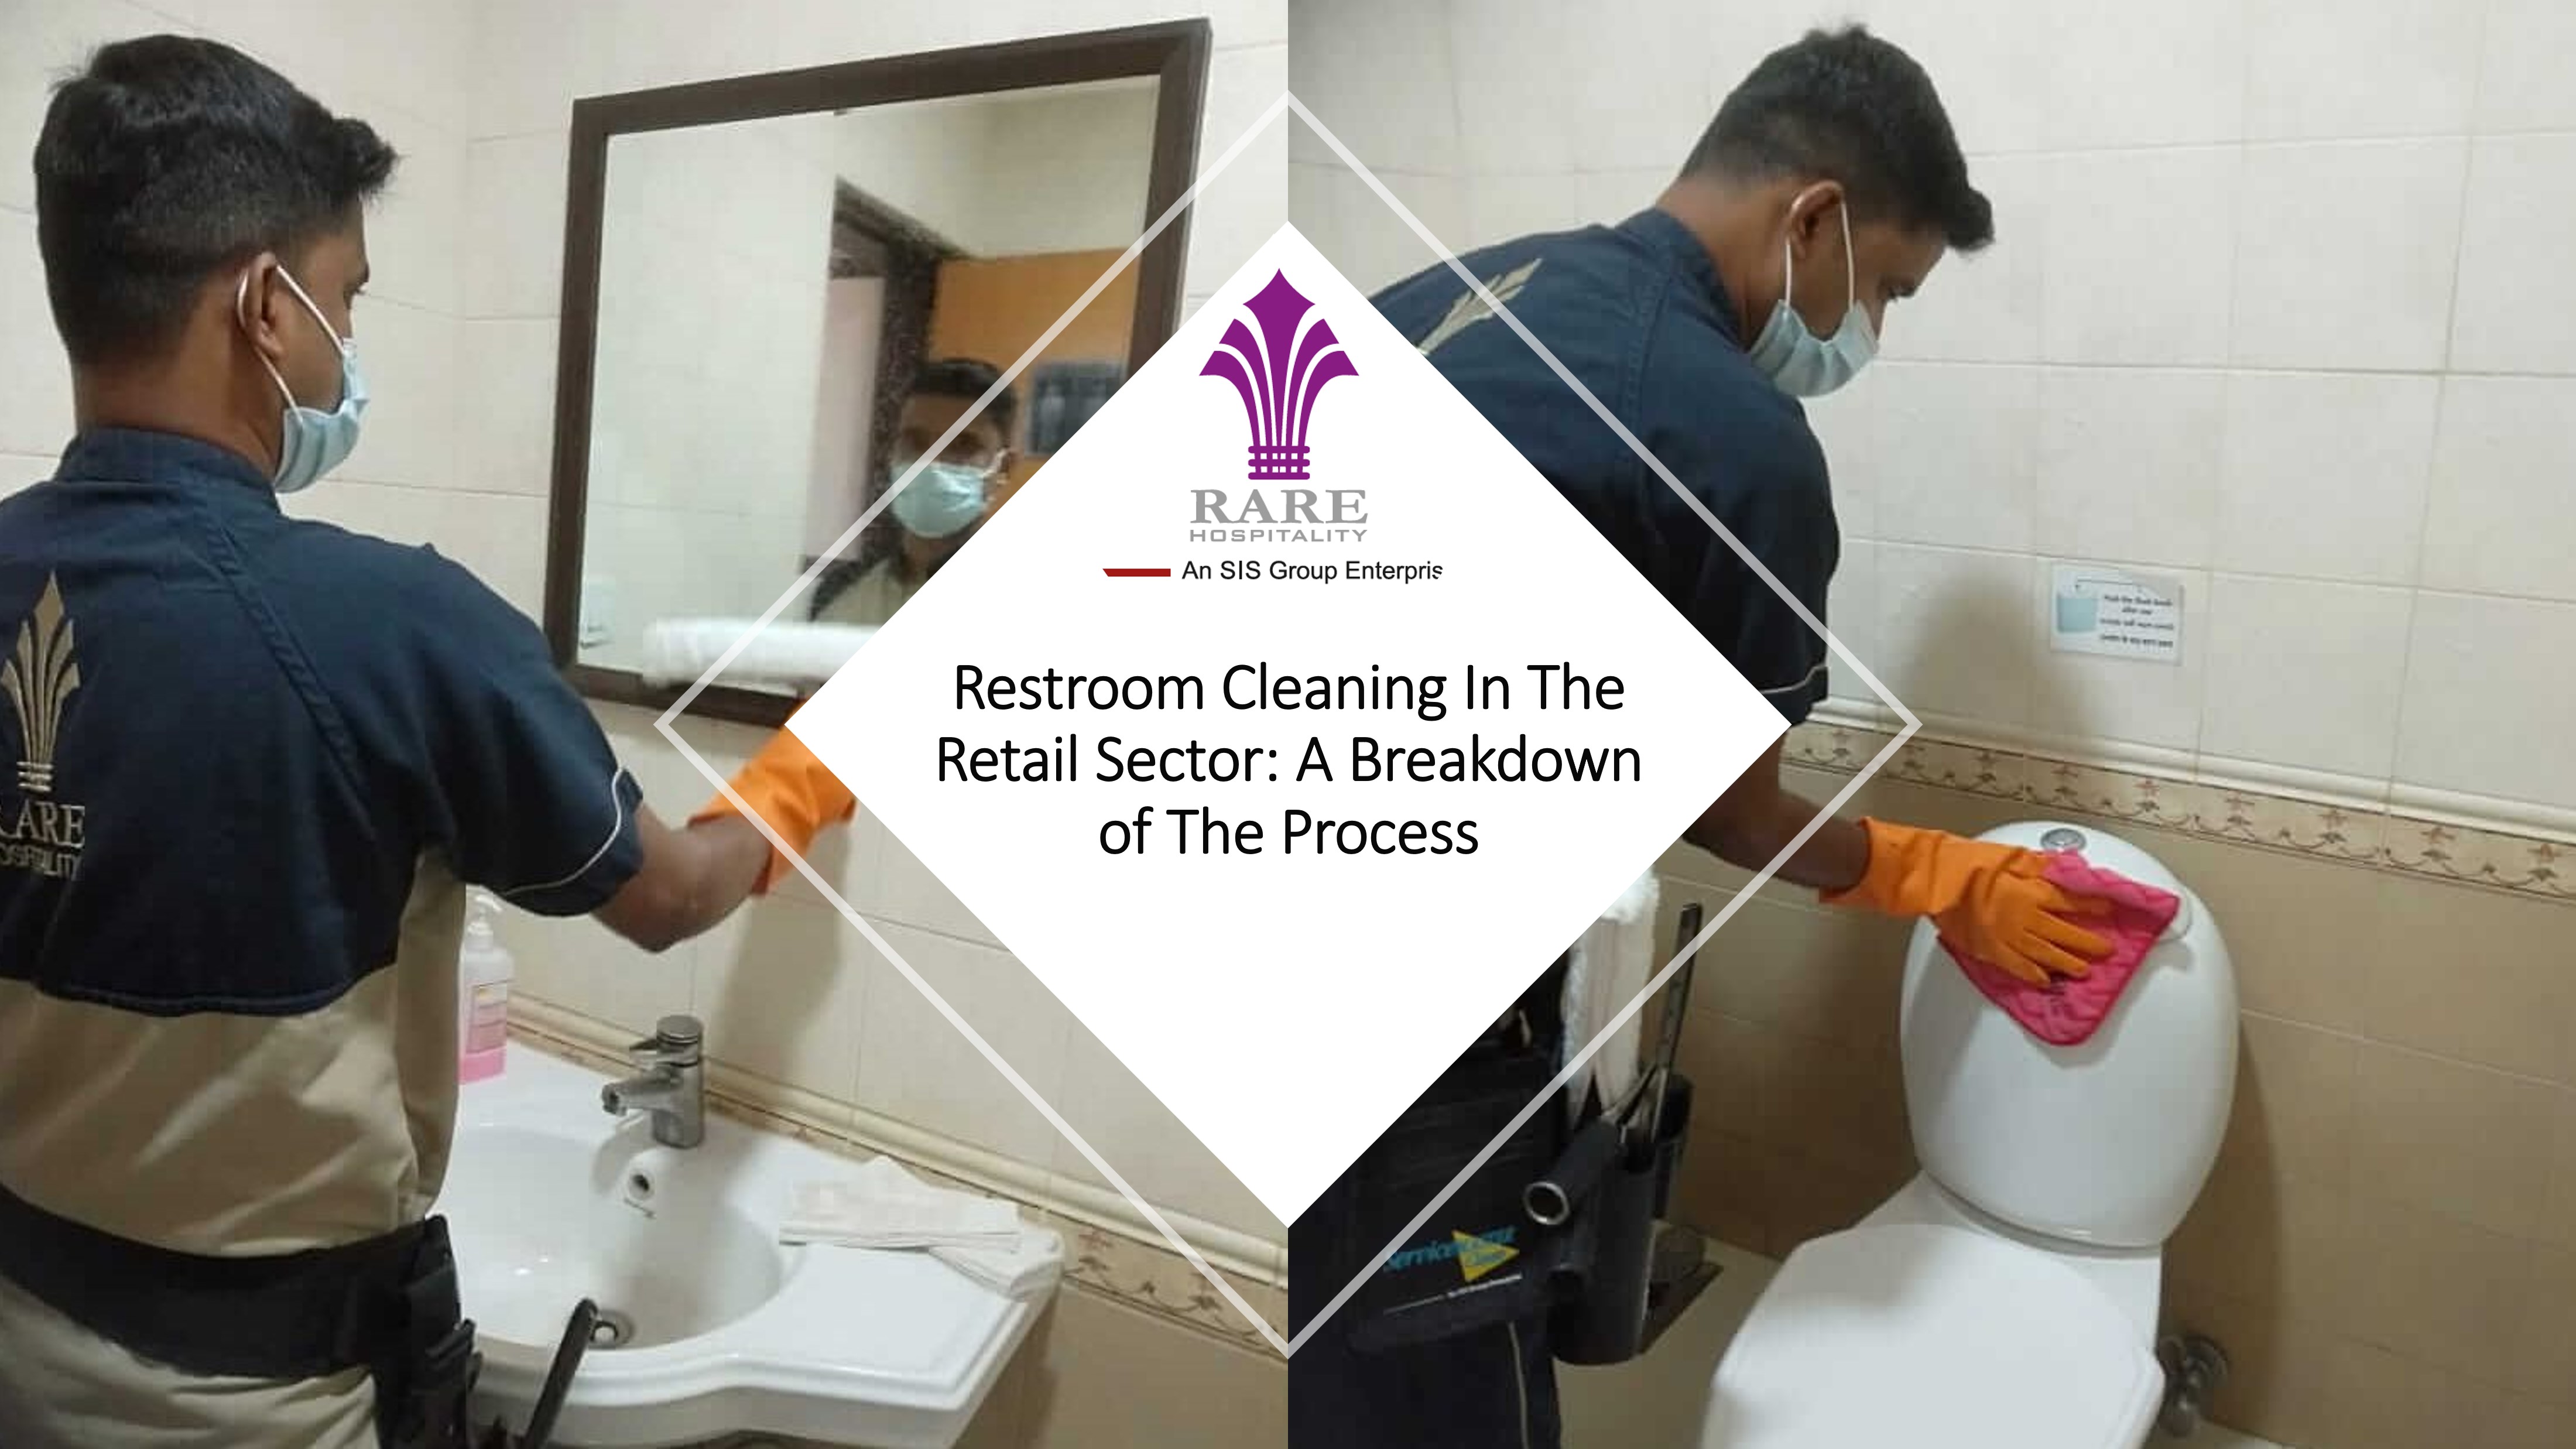 Rest room cleaning